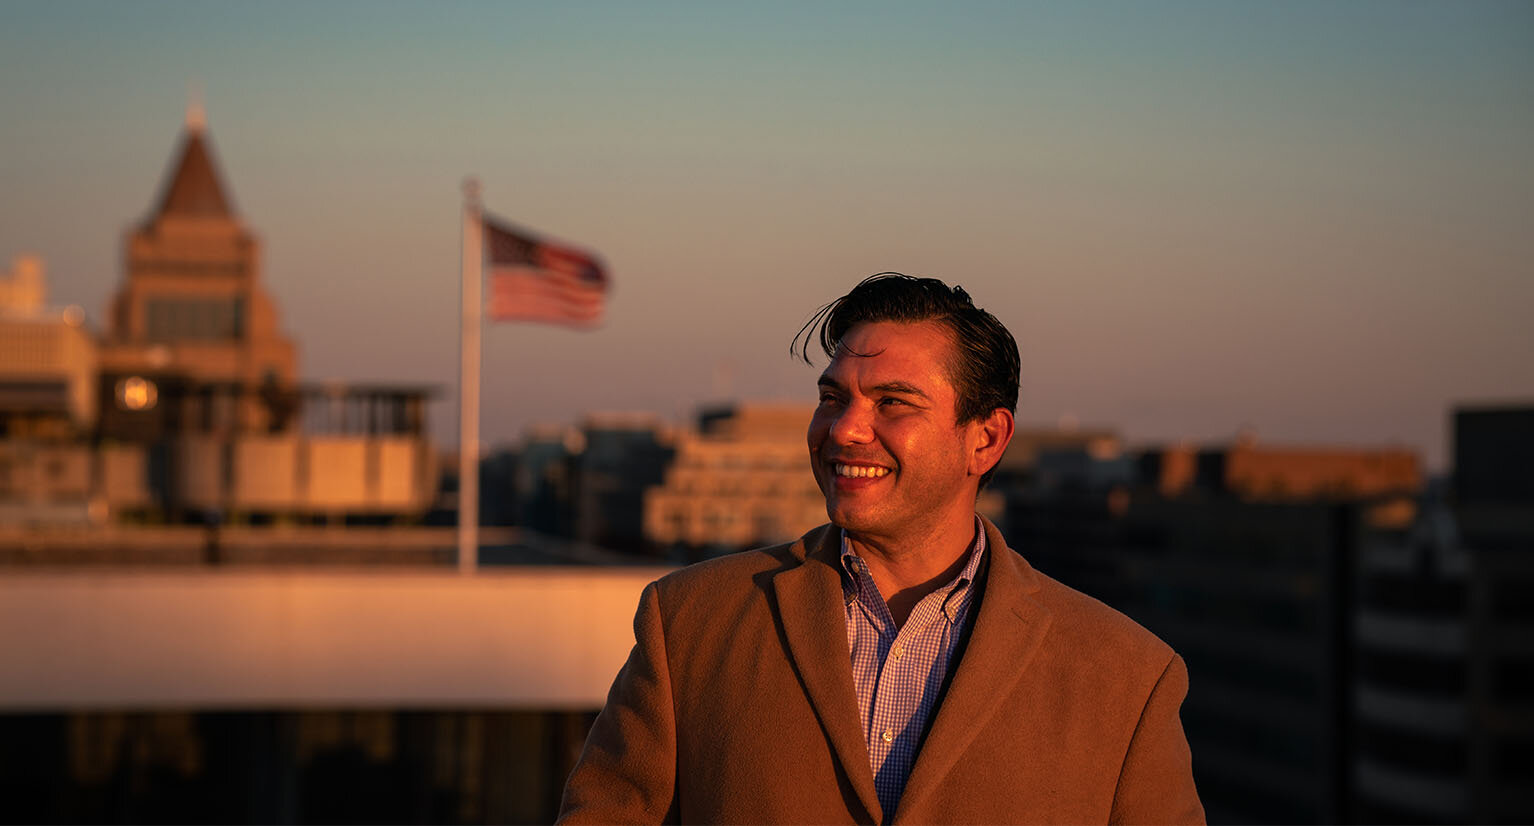 RR - Ed Trust - Wil Del Pilar on the rooftop of The Education Trust office in Washington, D.C..jpg